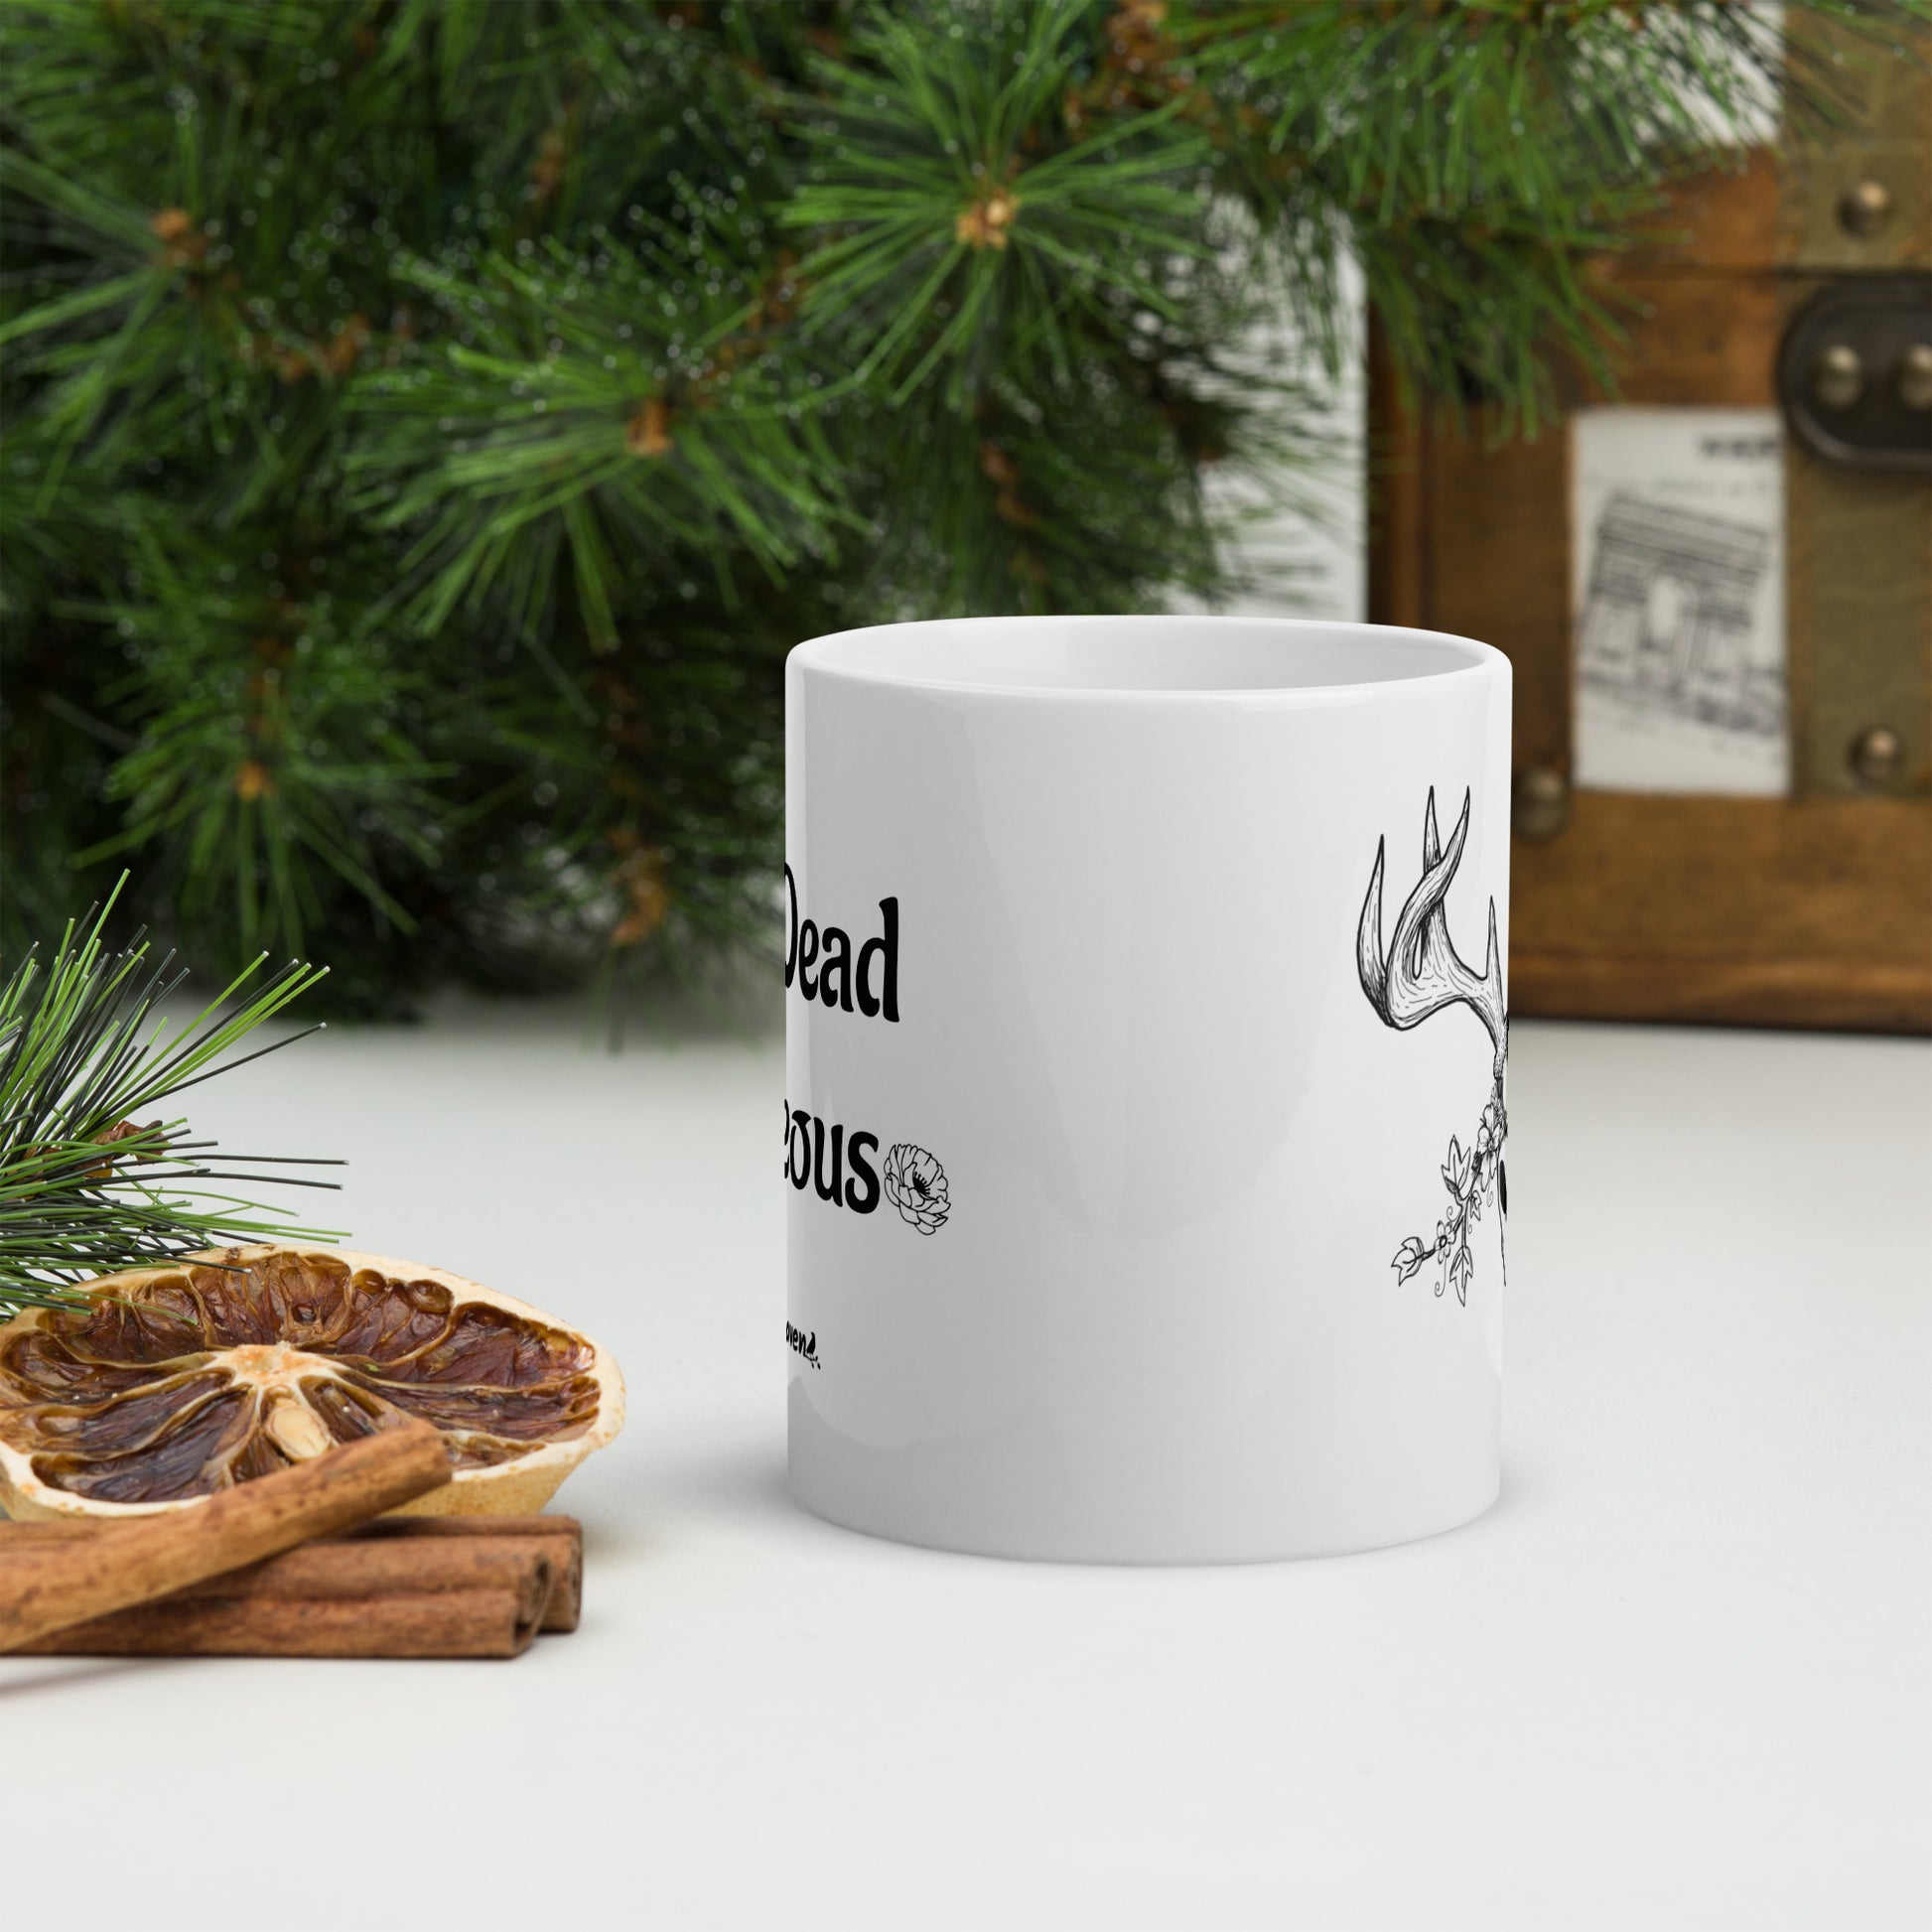 11 ounce white ceramic mug. Features illustrated deer skull wreathed in flowers on one side and Drop dead gorgeous text on the other side. Dishwasher and microwave safe. Front view of mug shown by cinnamon sticks, dried citrus slices, and pine boughs.